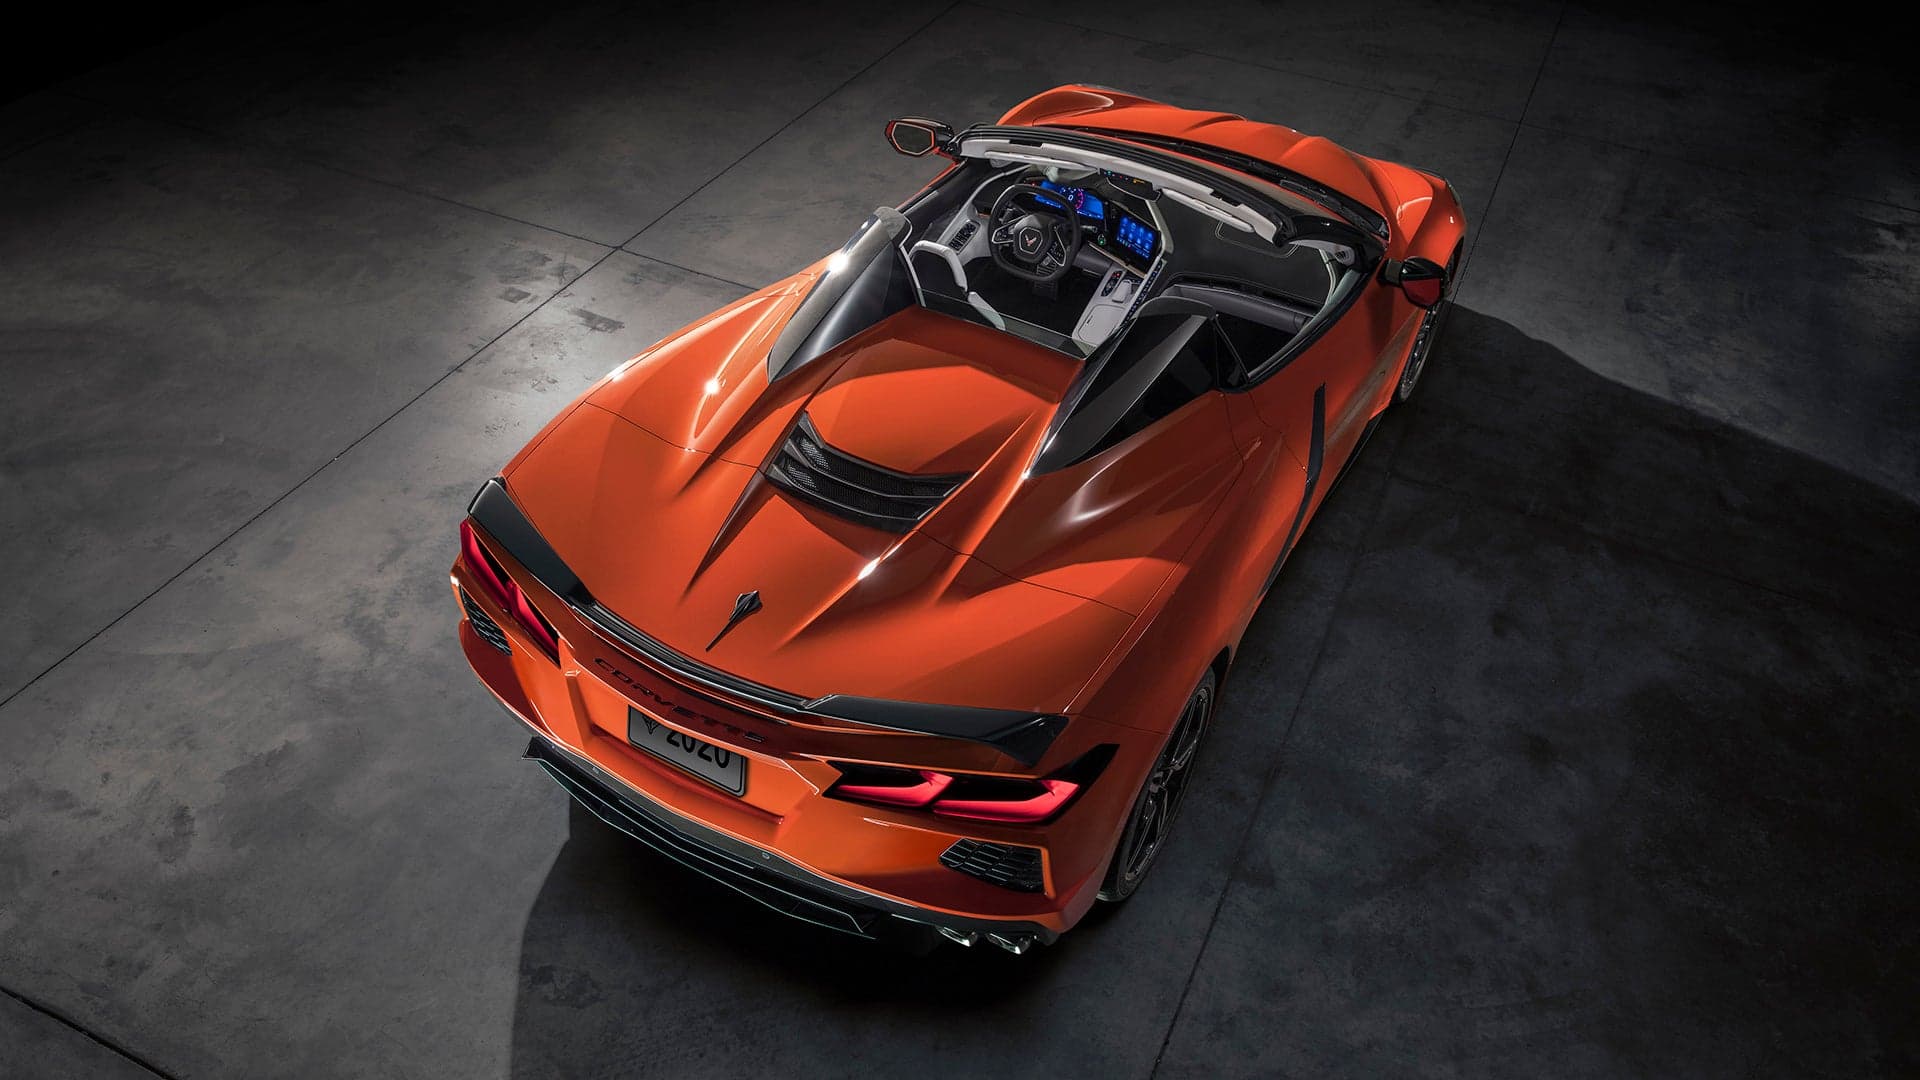 2020 Chevrolet Corvette C8 Convertible Revealed: Open-Air Speed Without Compromise